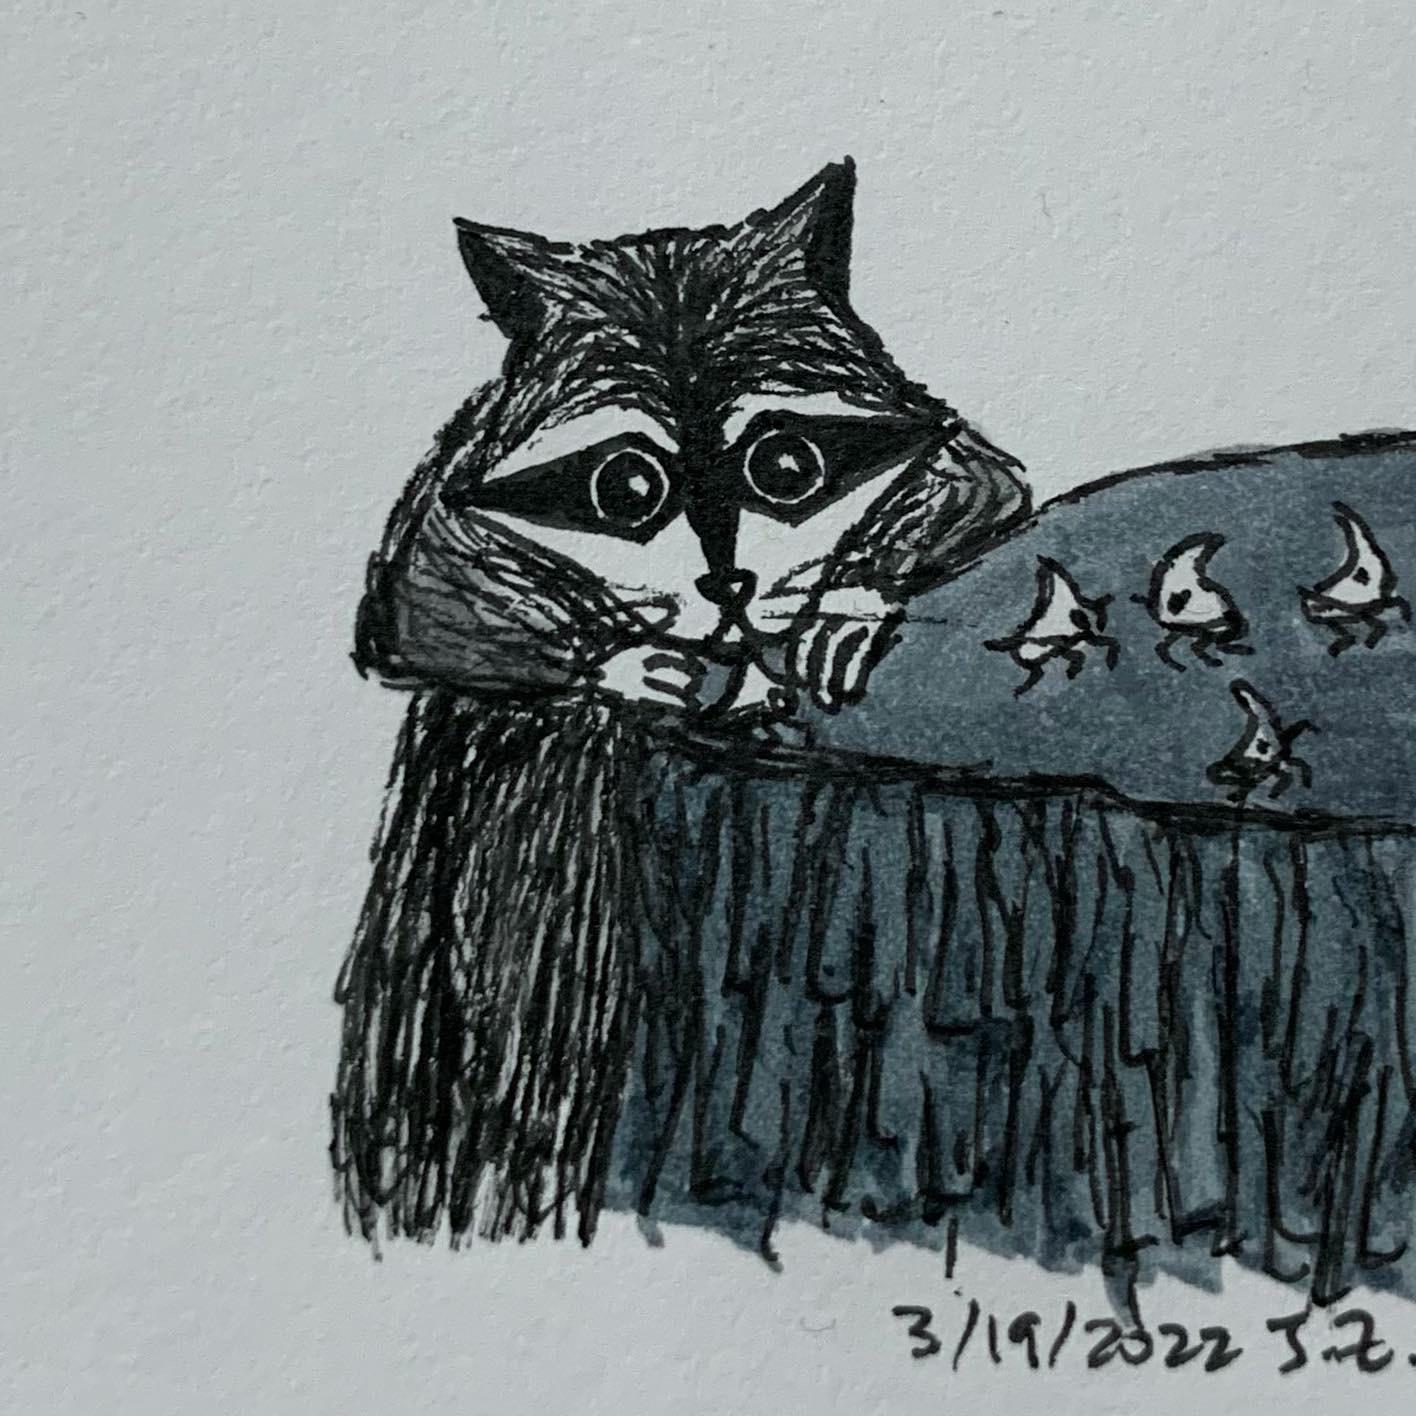 Raccoon discovers thorn bugs on a tree stump 3/19/2022 Sketchdaily